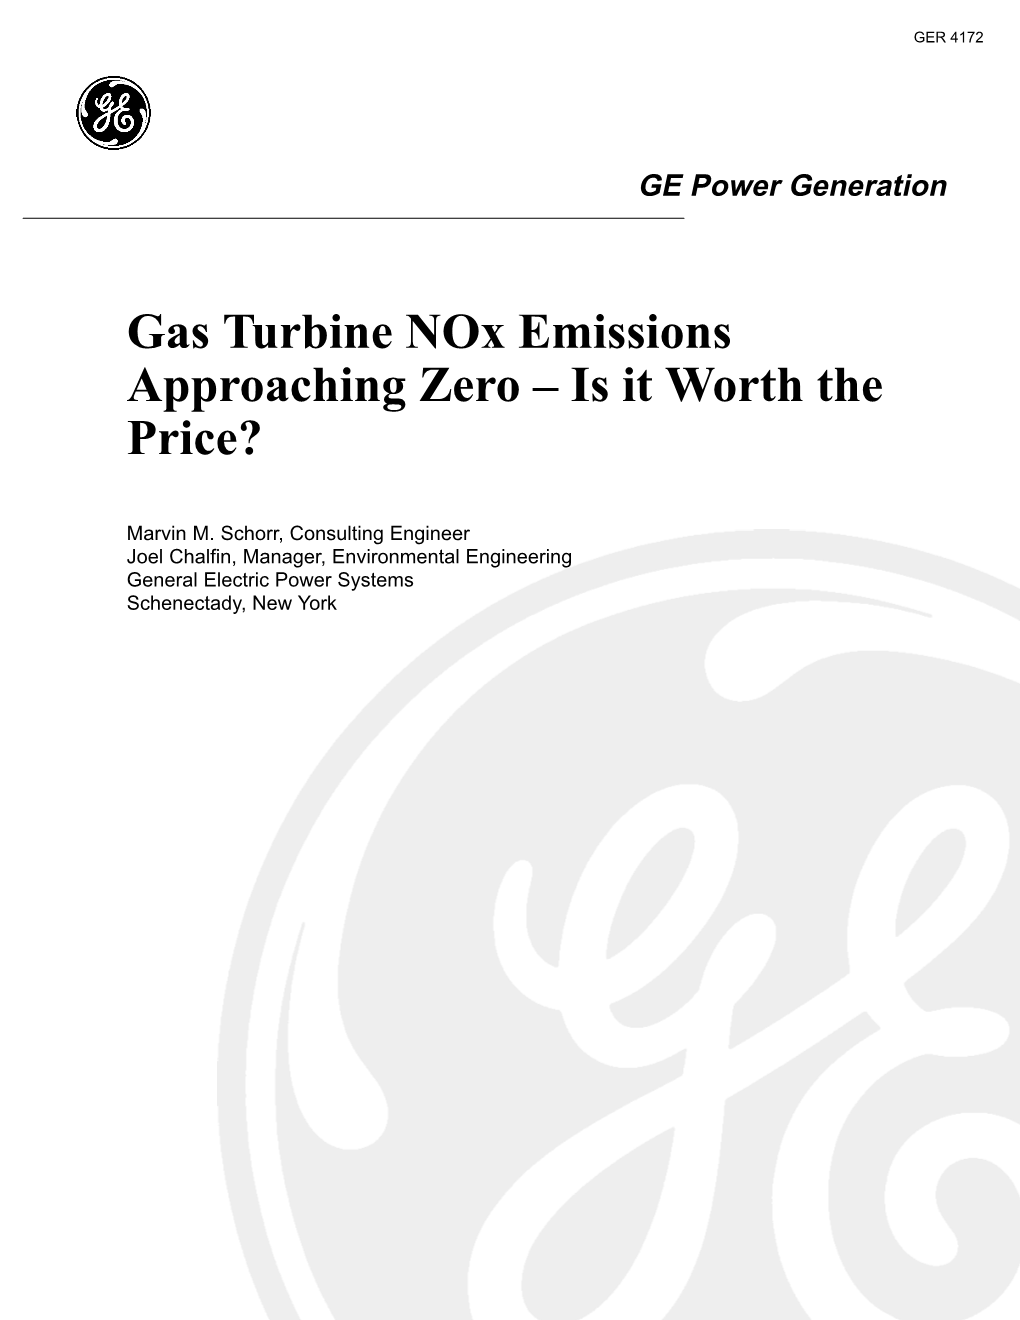 Gas Turbine Nox Emissions Approaching Zero – Is It Worth the Price?